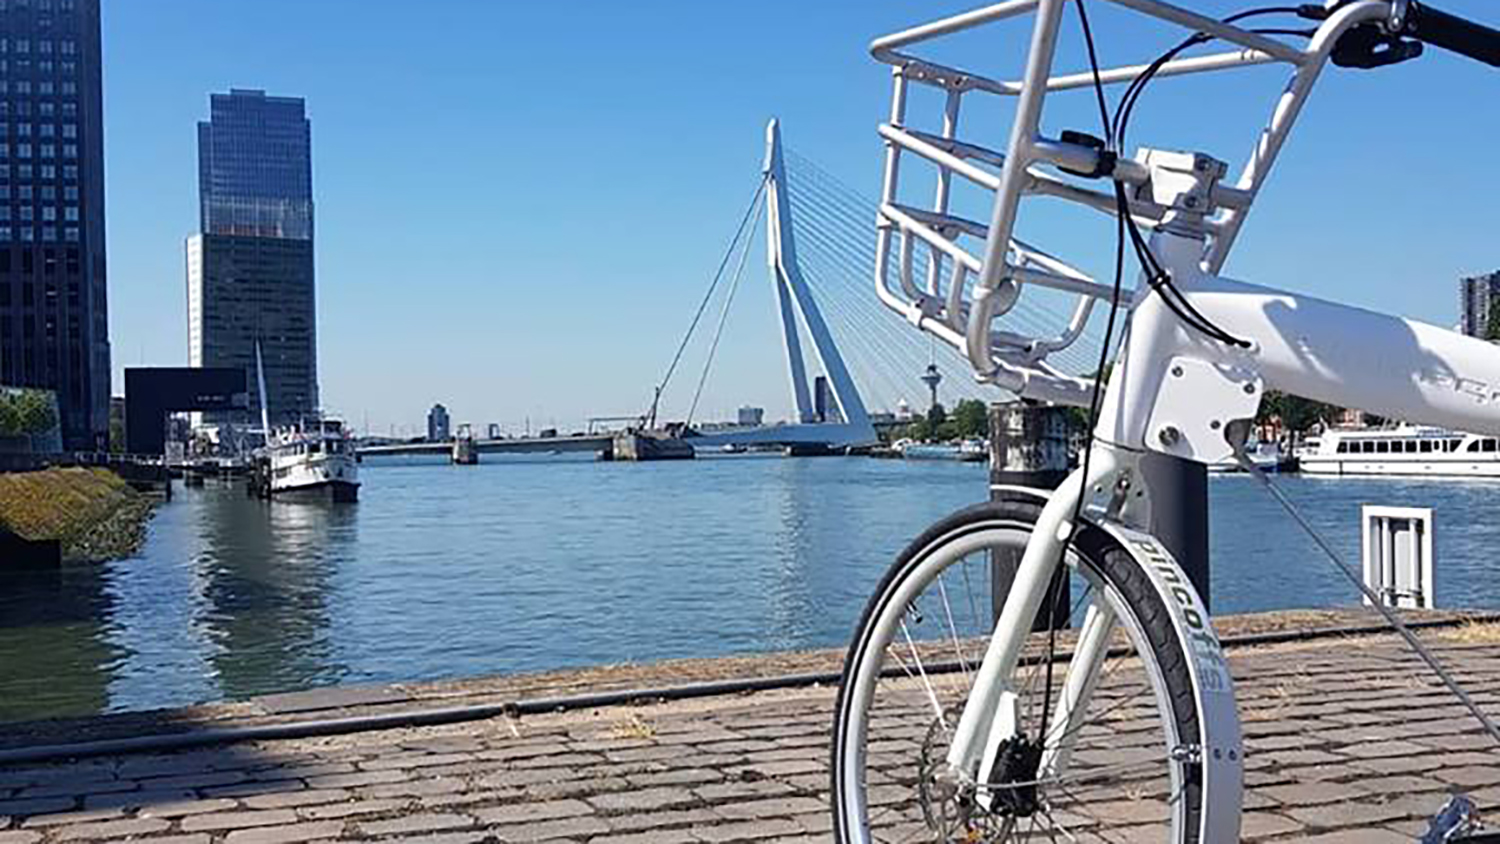 Discover Rotterdam by bike